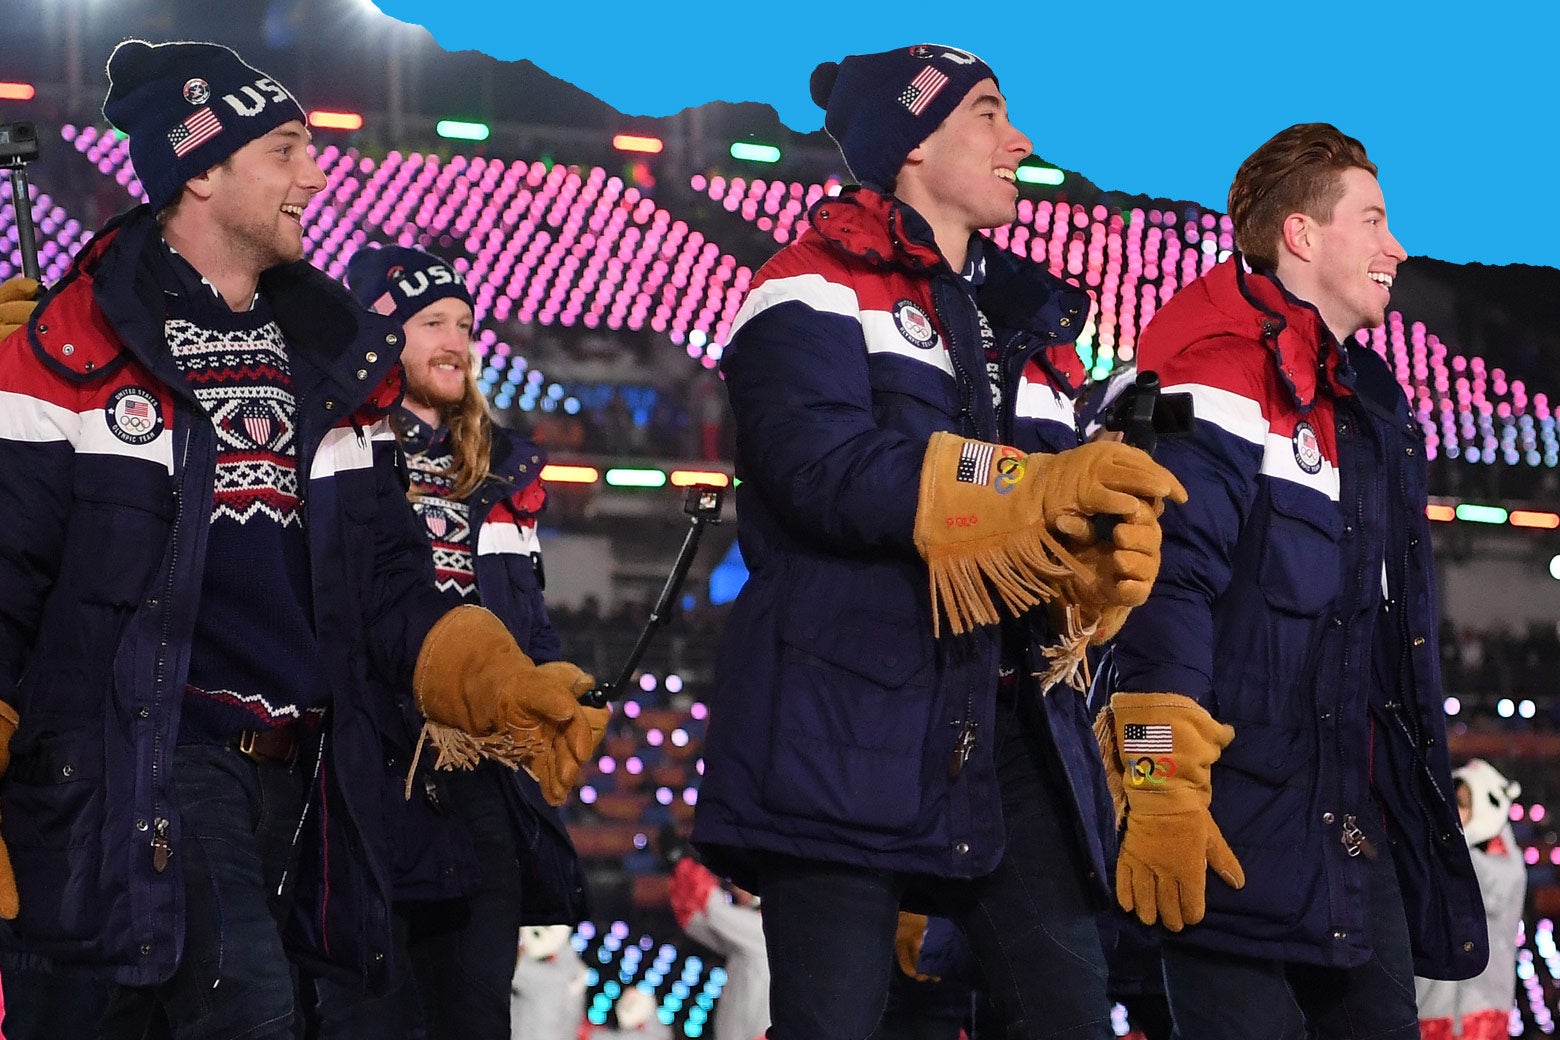 United States athletes take part during the Opening Ceremony of the PyeongChang 2018 Winter Olympic Games at PyeongChang Olympic Stadium on February 9, 2018 in Pyeongchang-gun, South Korea.